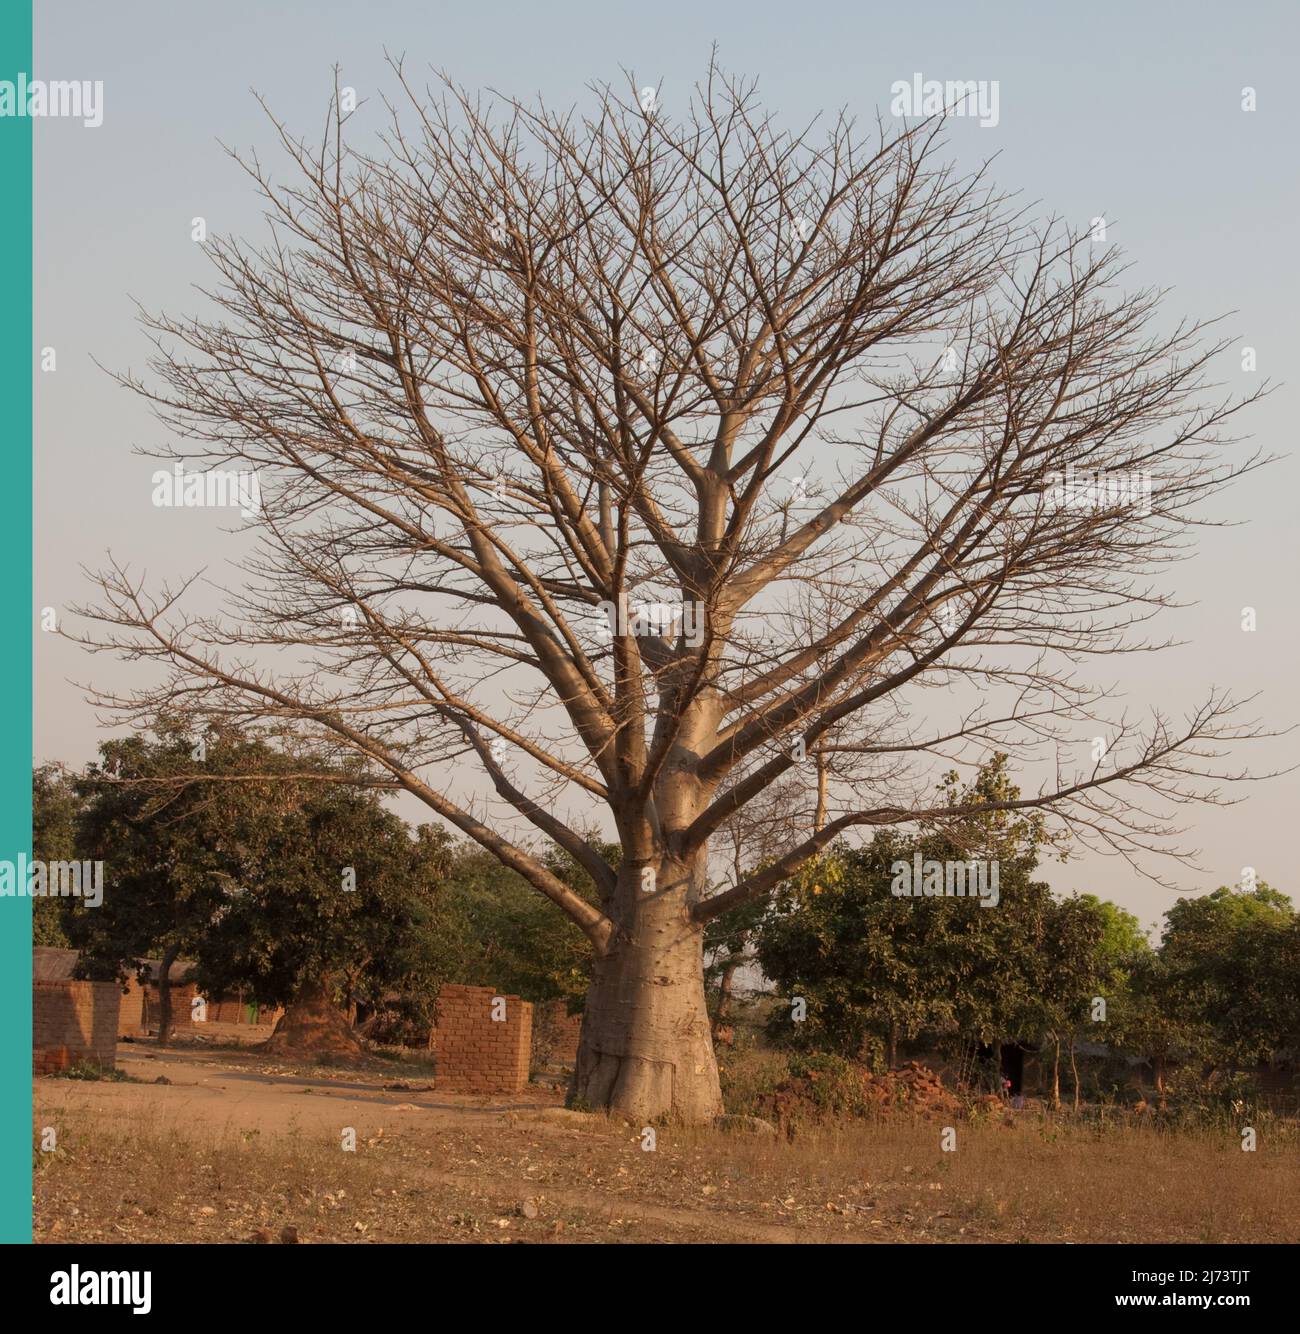 Baobab Tree (Adonsonia), Small African Village, Chikwawa District, Malawi.  Baobab tree is sometimes called the "Upside Down tree" ad very iconic in s  Stock Photo - Alamy